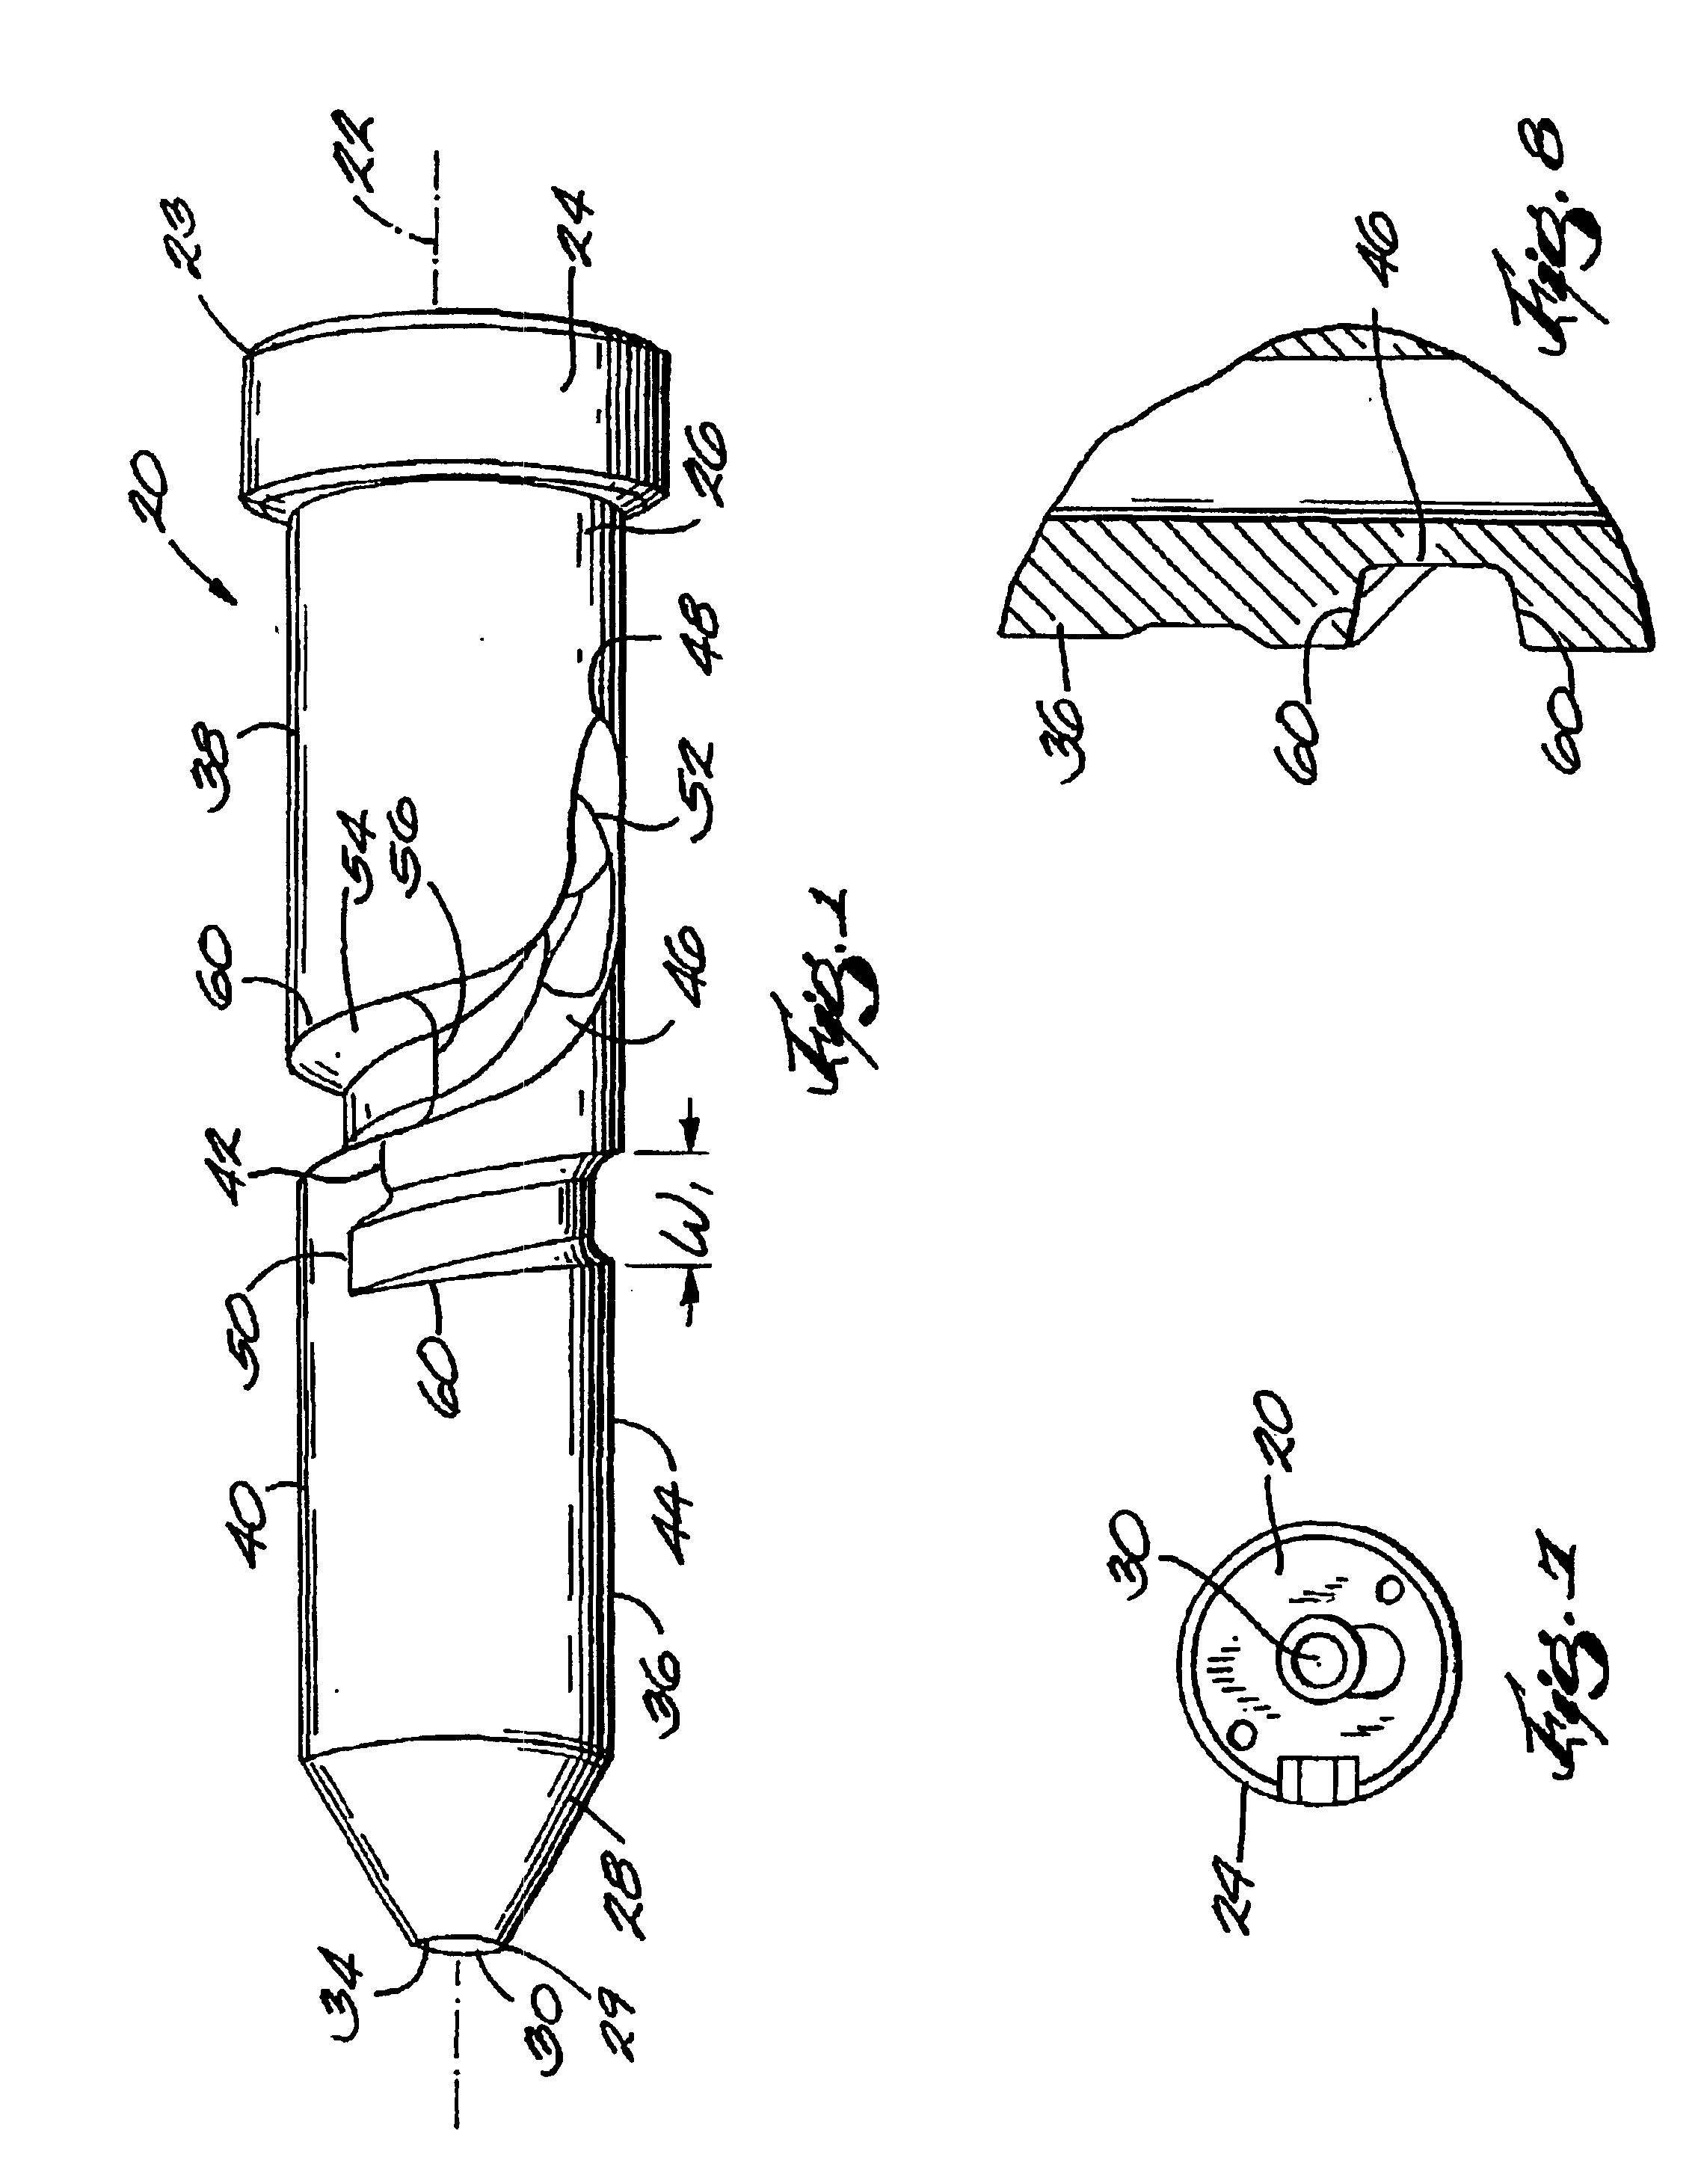 Co-injection apparatus for injection molding